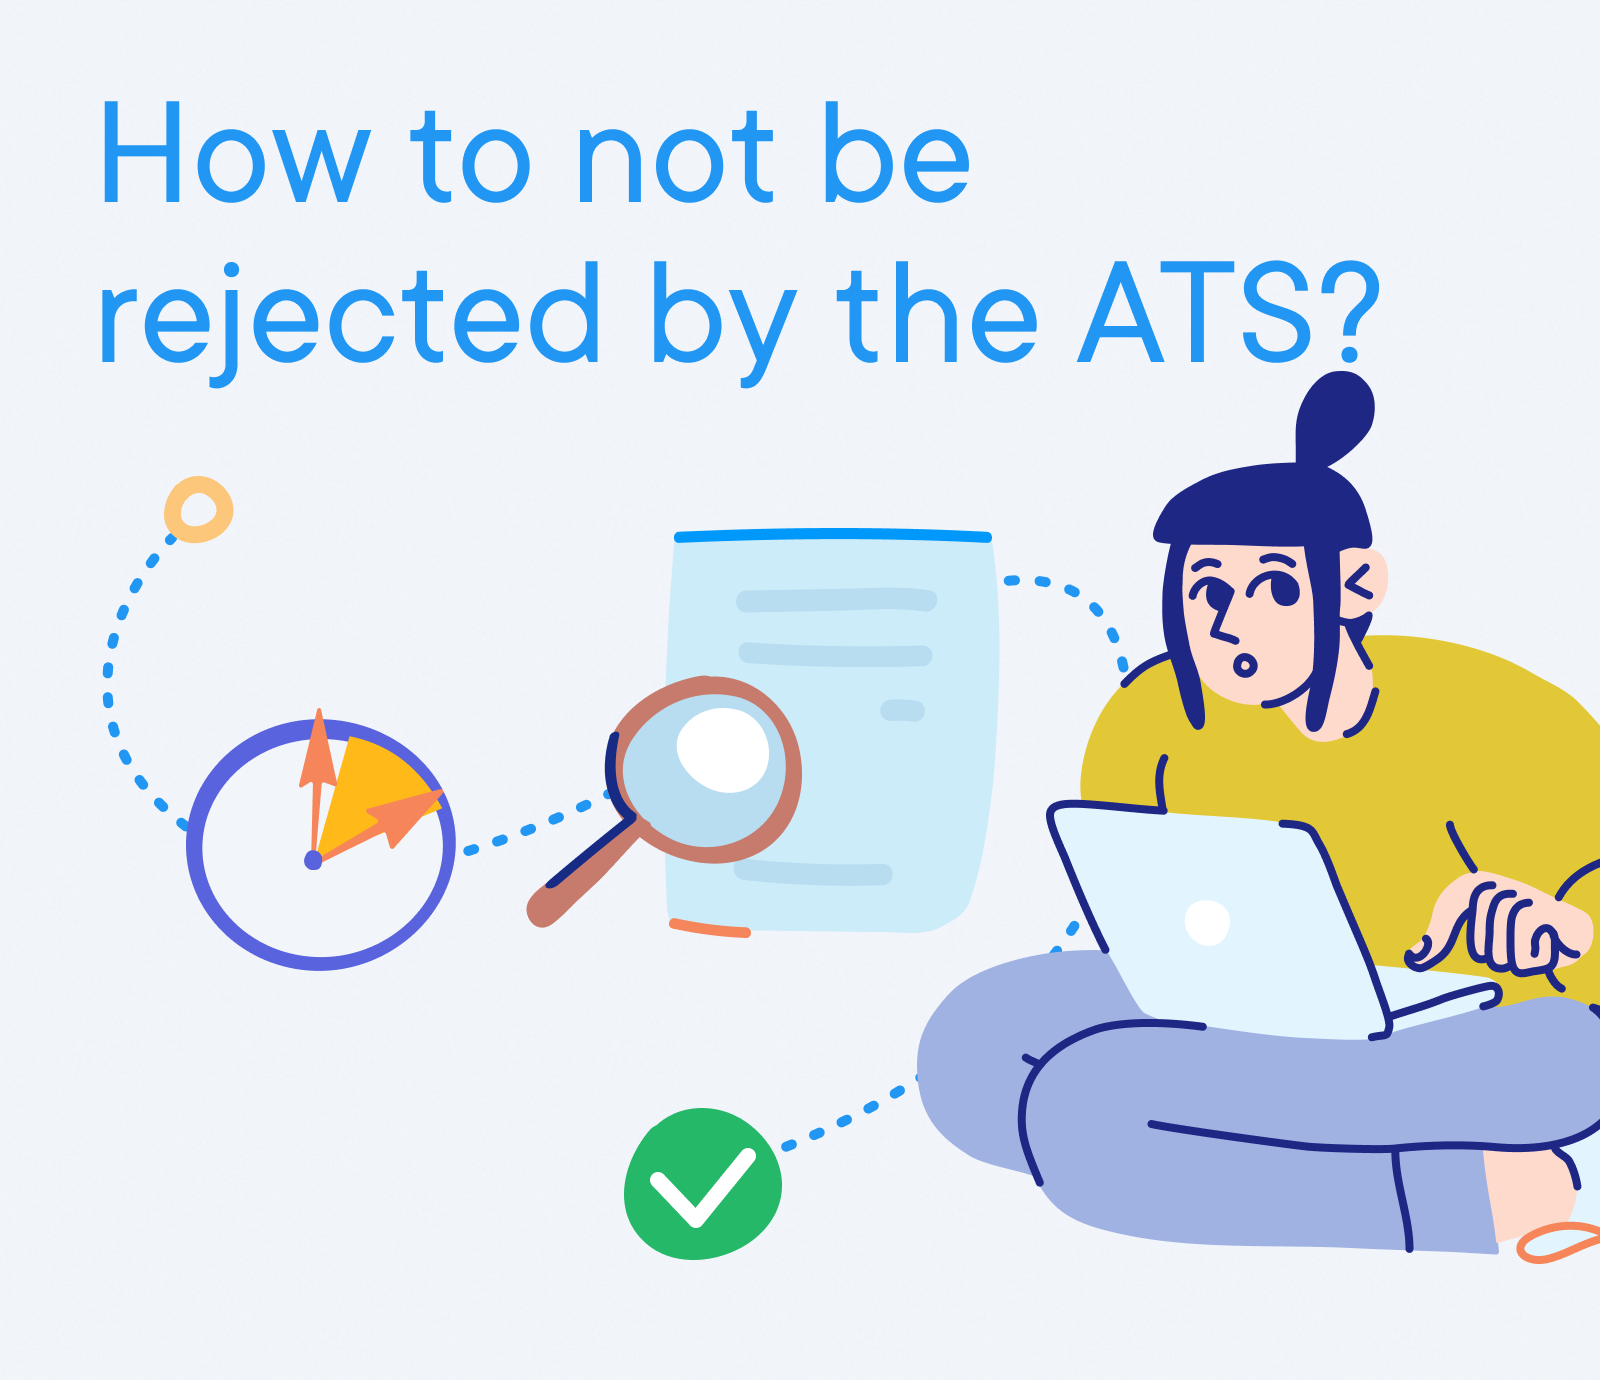 Operations Manager - How to not be rejected by the ATS?